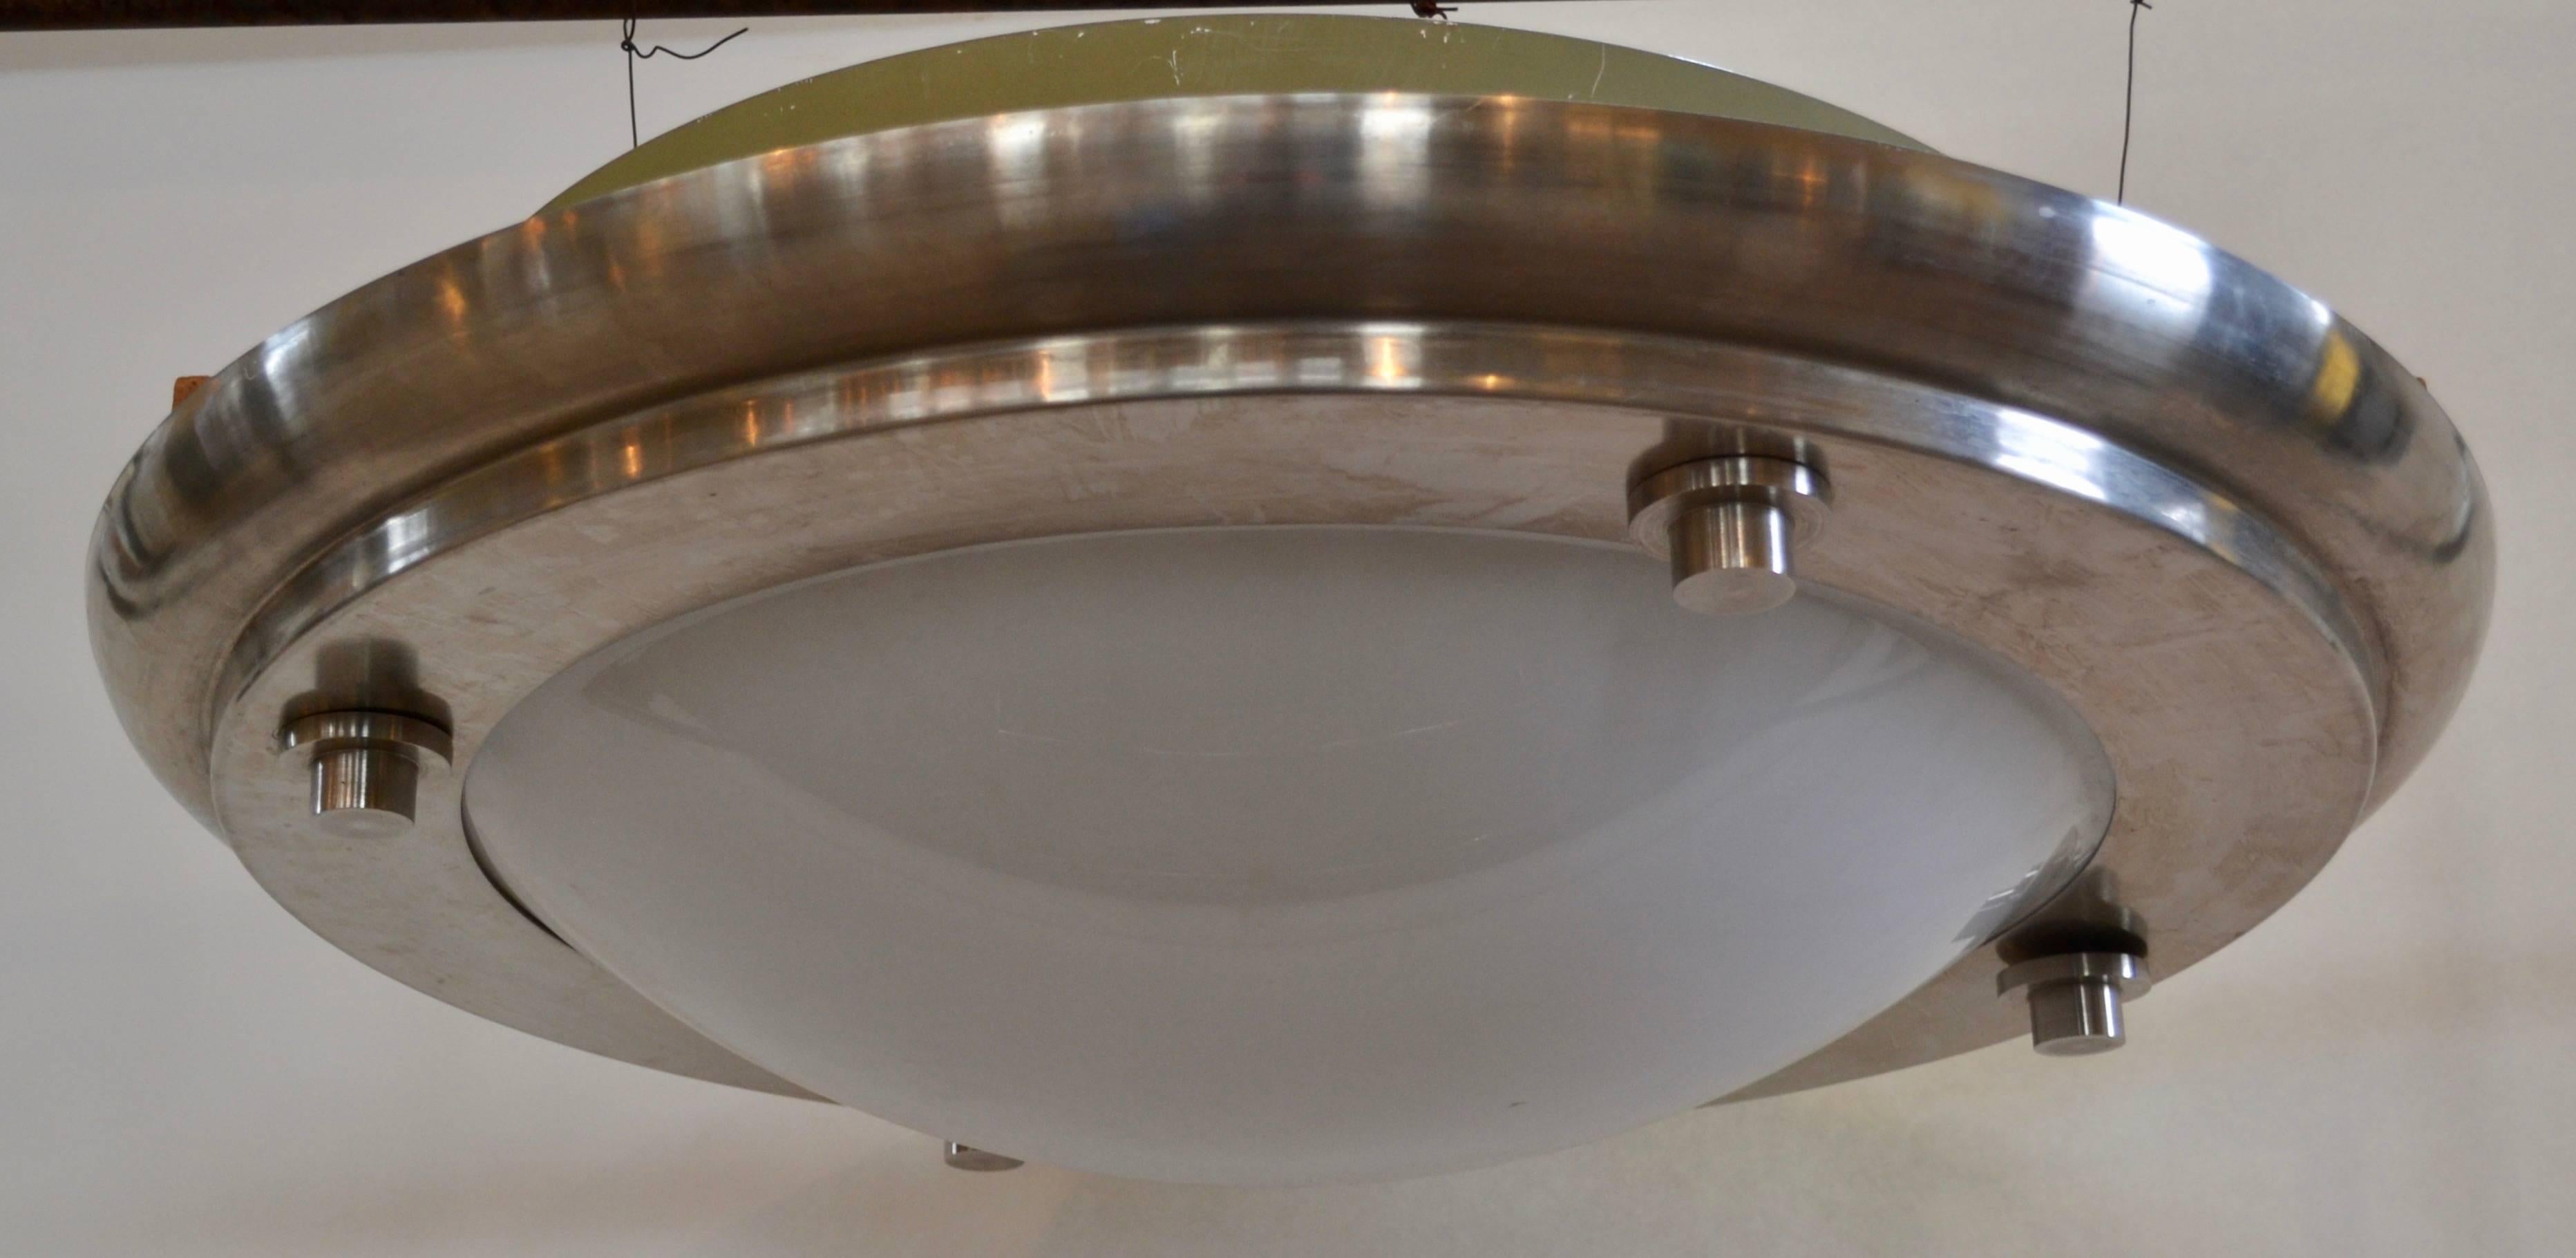 This oversized and partially recessed, flush mount ceiling fixture, designed by the renowned Postmodern and New Urbanism architect Michael Graves (d.2015) for the The International Finance Corp of The World Bank, circa 1993. The lights were removed